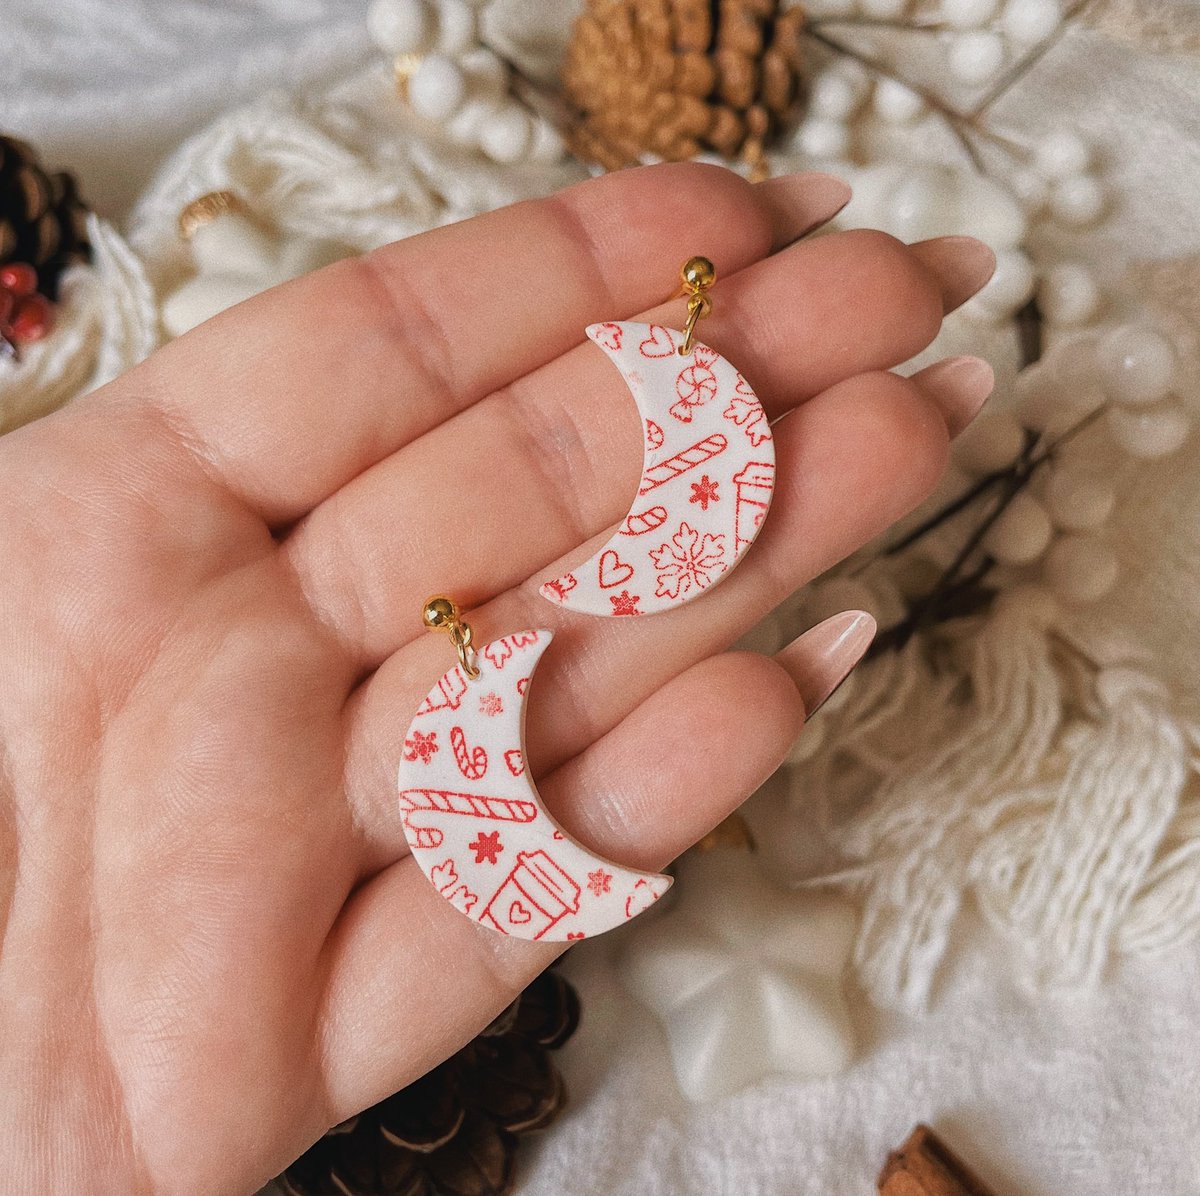 looking for some cute not-in-ur-face christmas earrings???? i gotchu 🎅🏼✨🌲